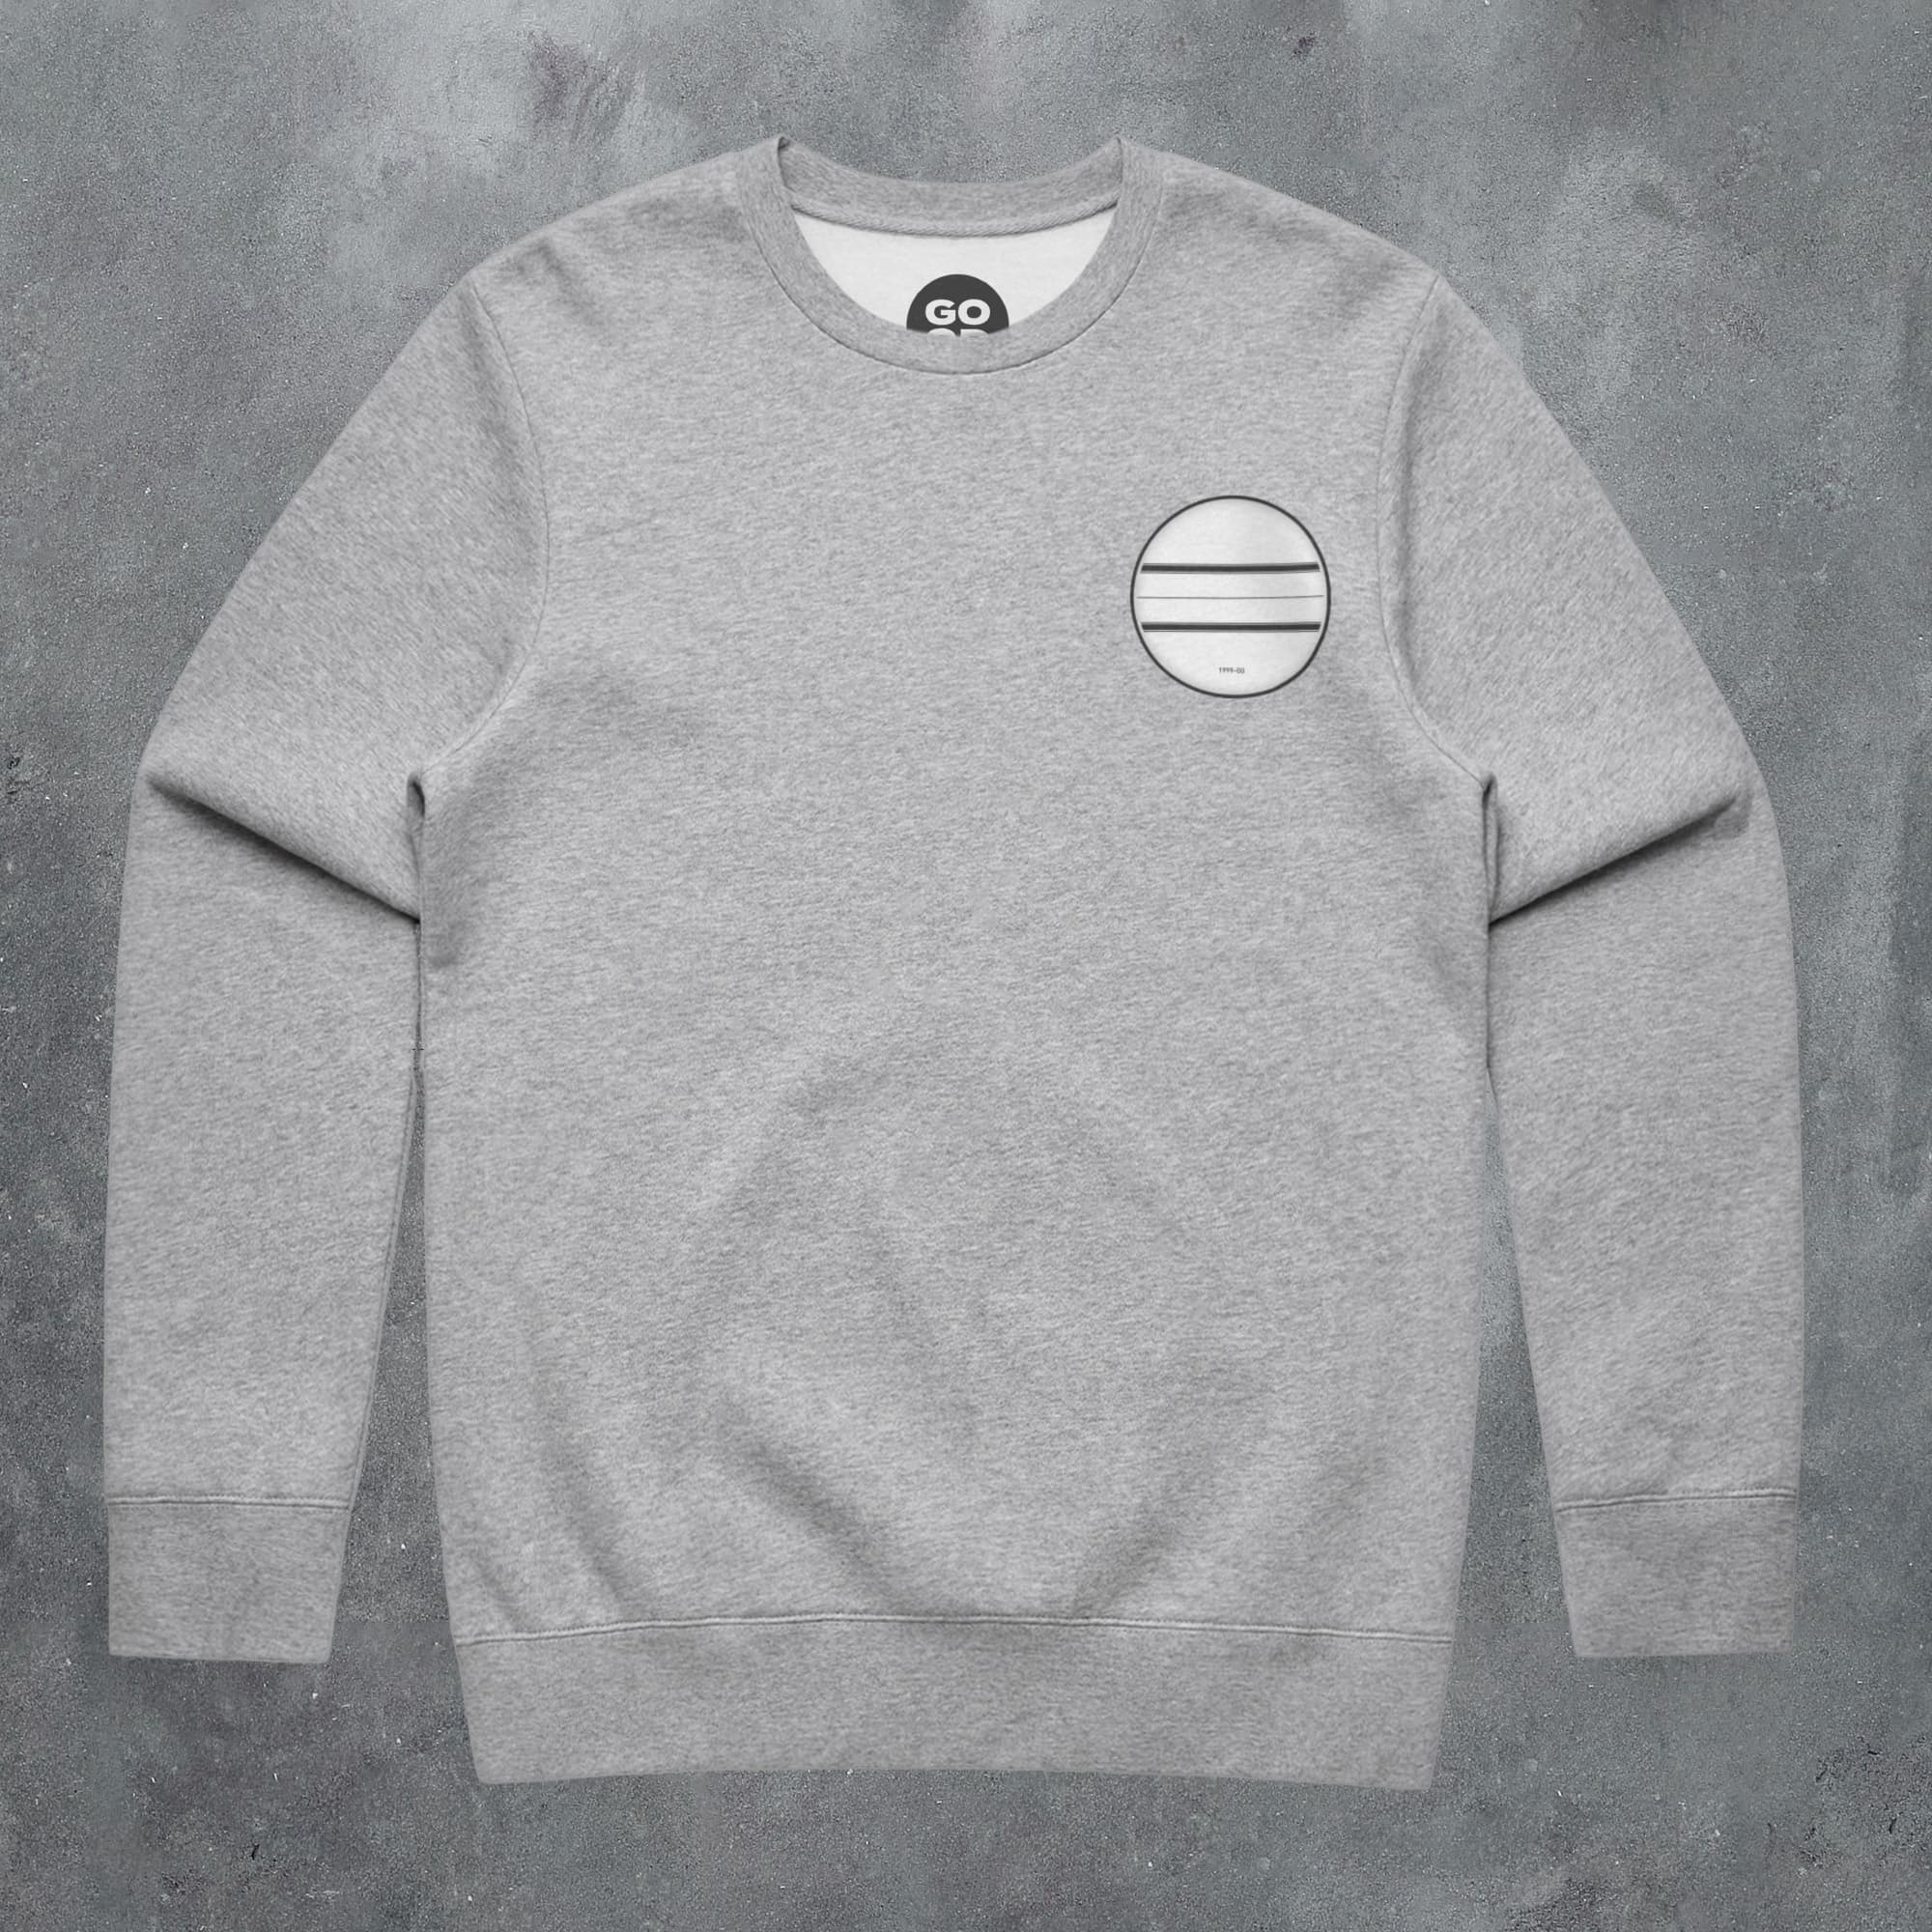 a grey sweatshirt with a white stripe on the chest